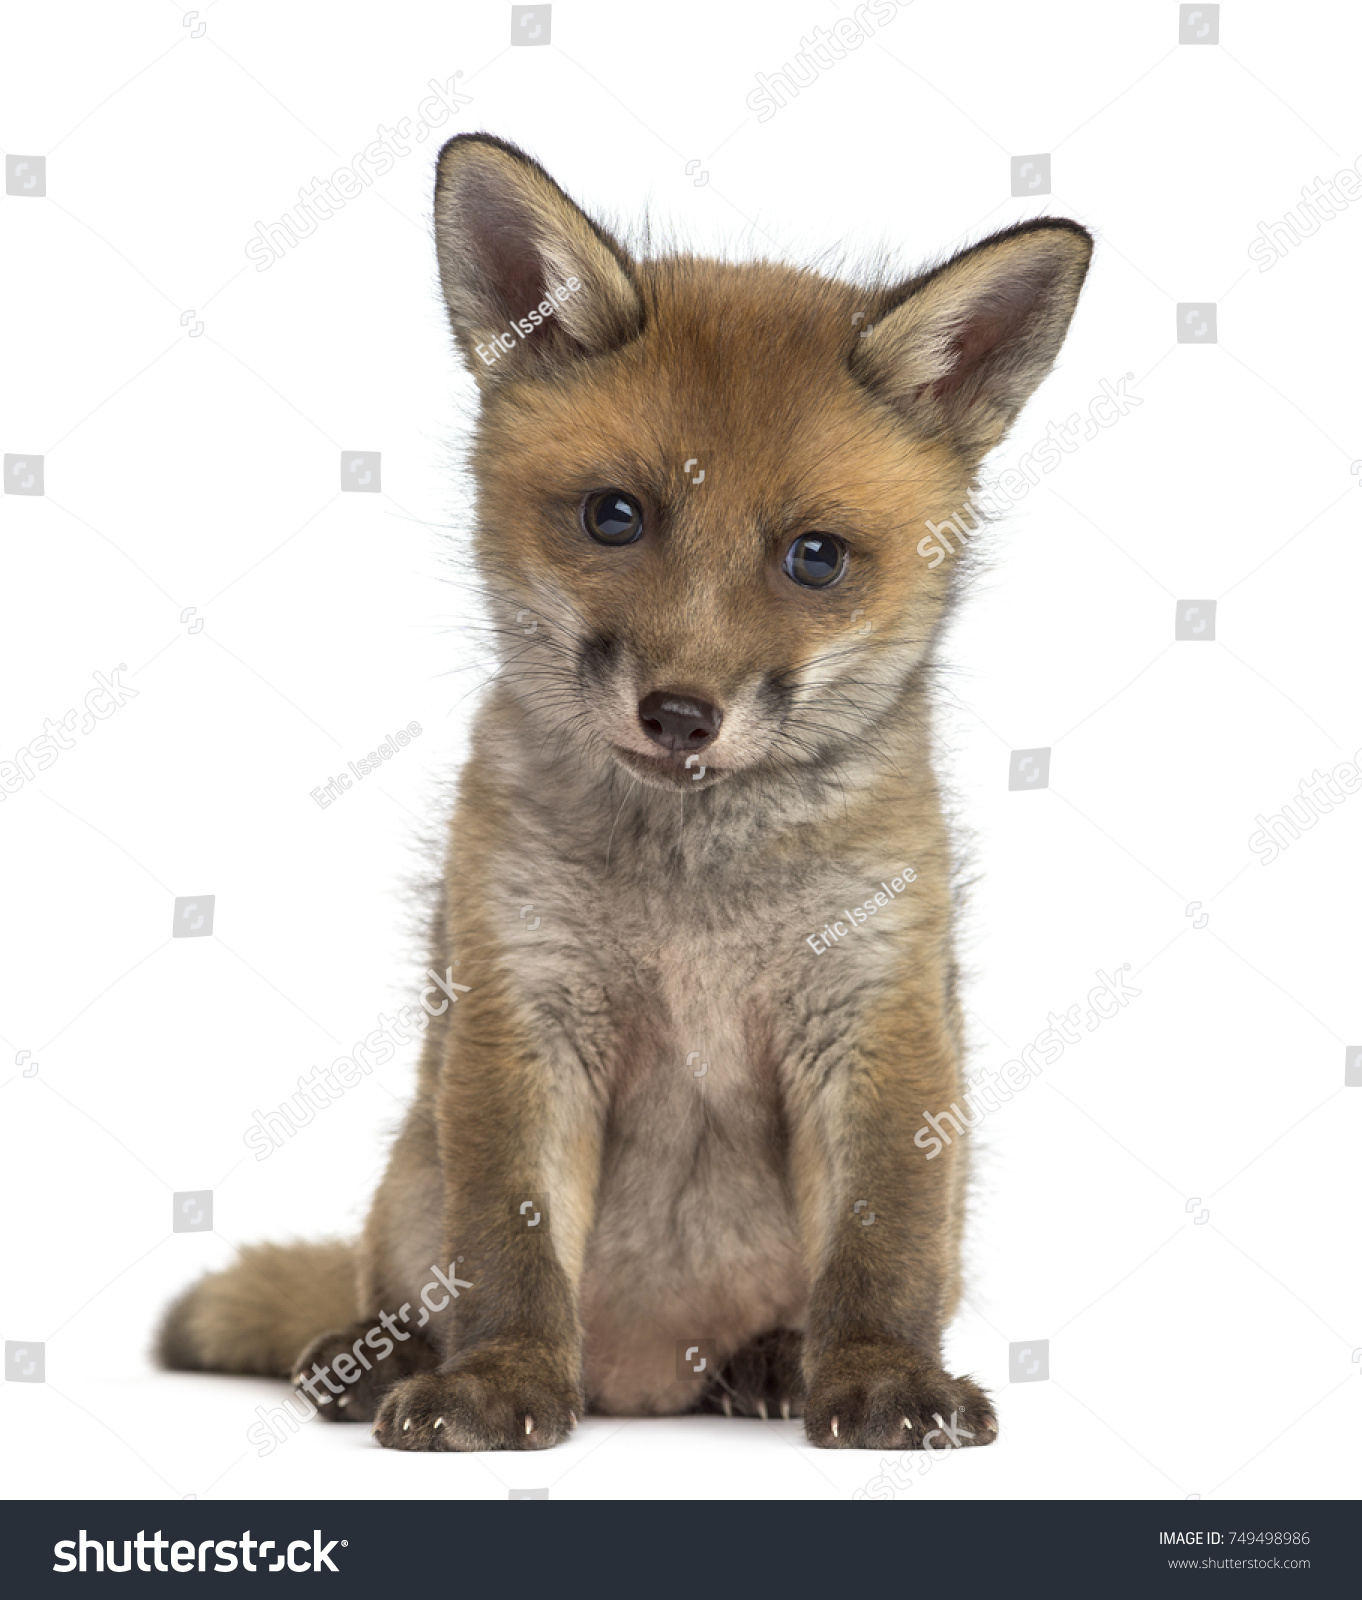 Fox cub (7 weeks old) sitting in front of a white background #749498986